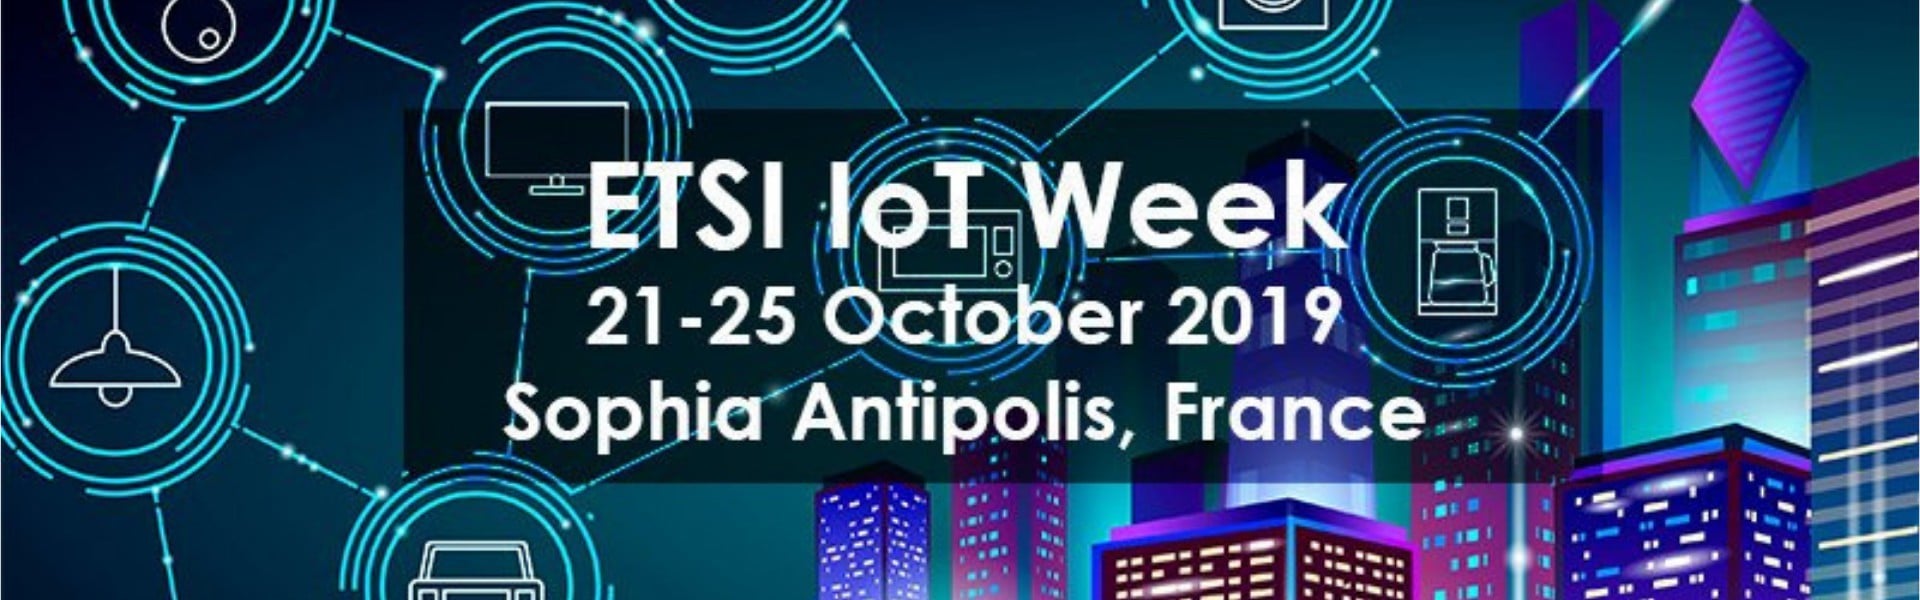 You are currently viewing insigh.io attended the ETSI IoT Week 2019